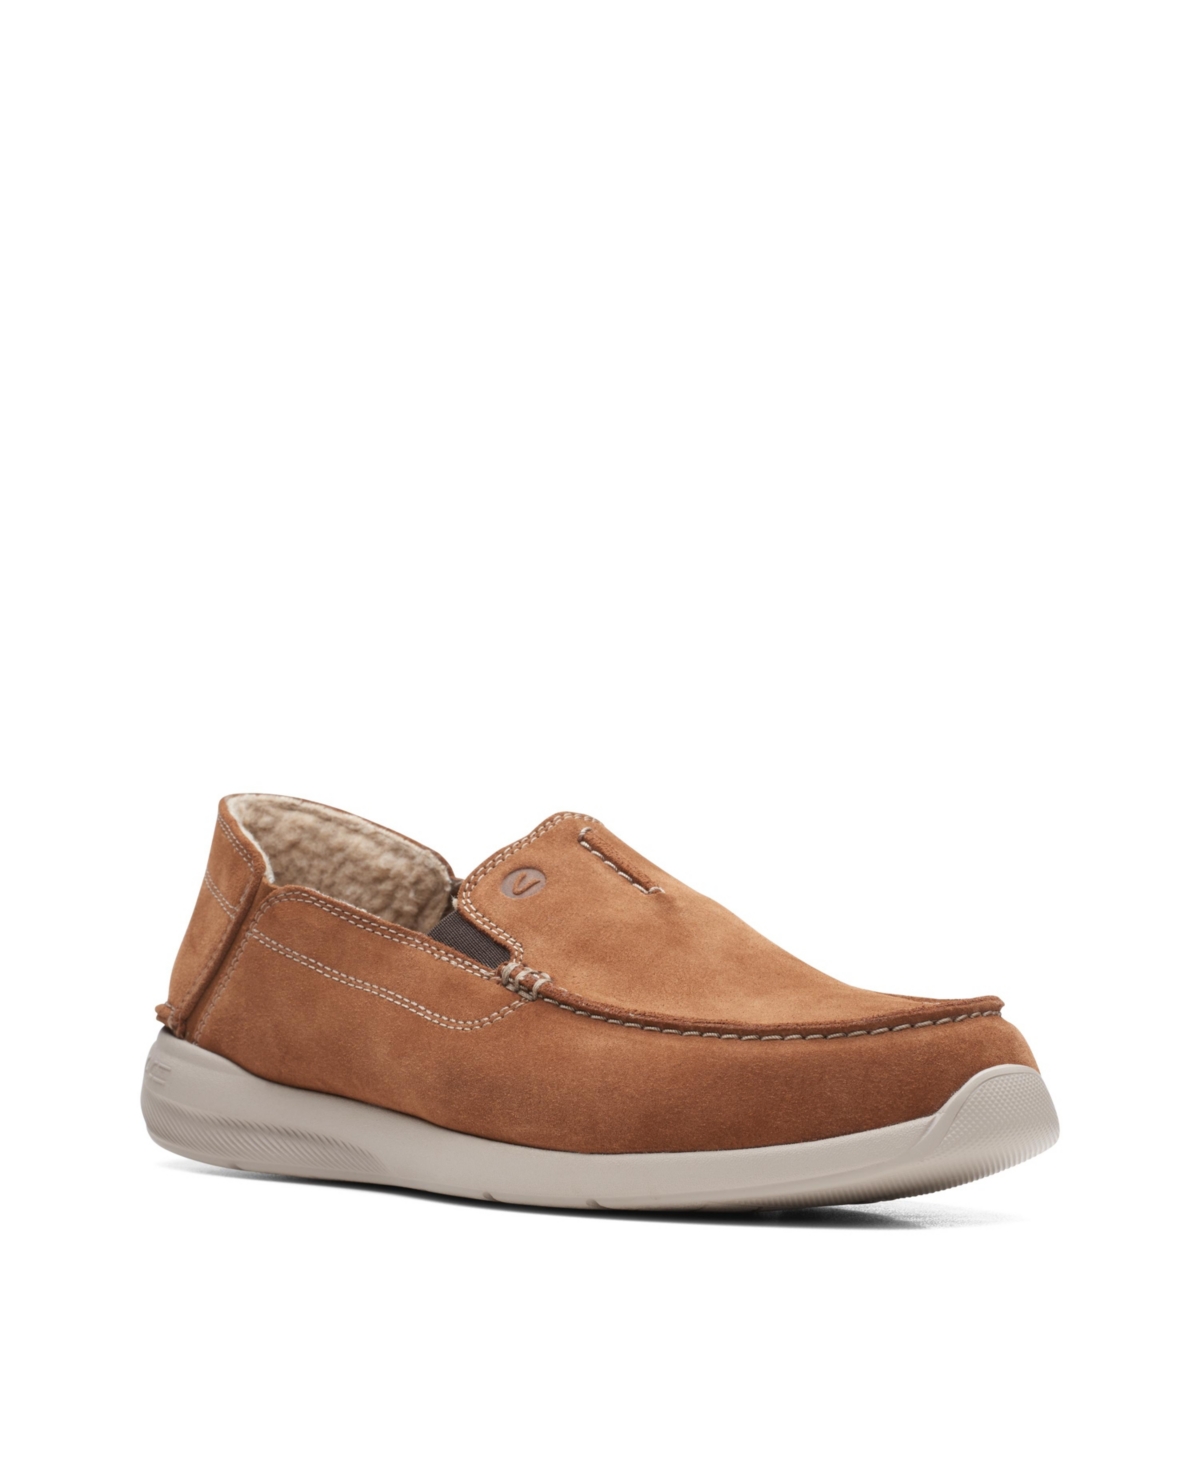 Men's Collection Gorwin Step Loafers - Cola Suede